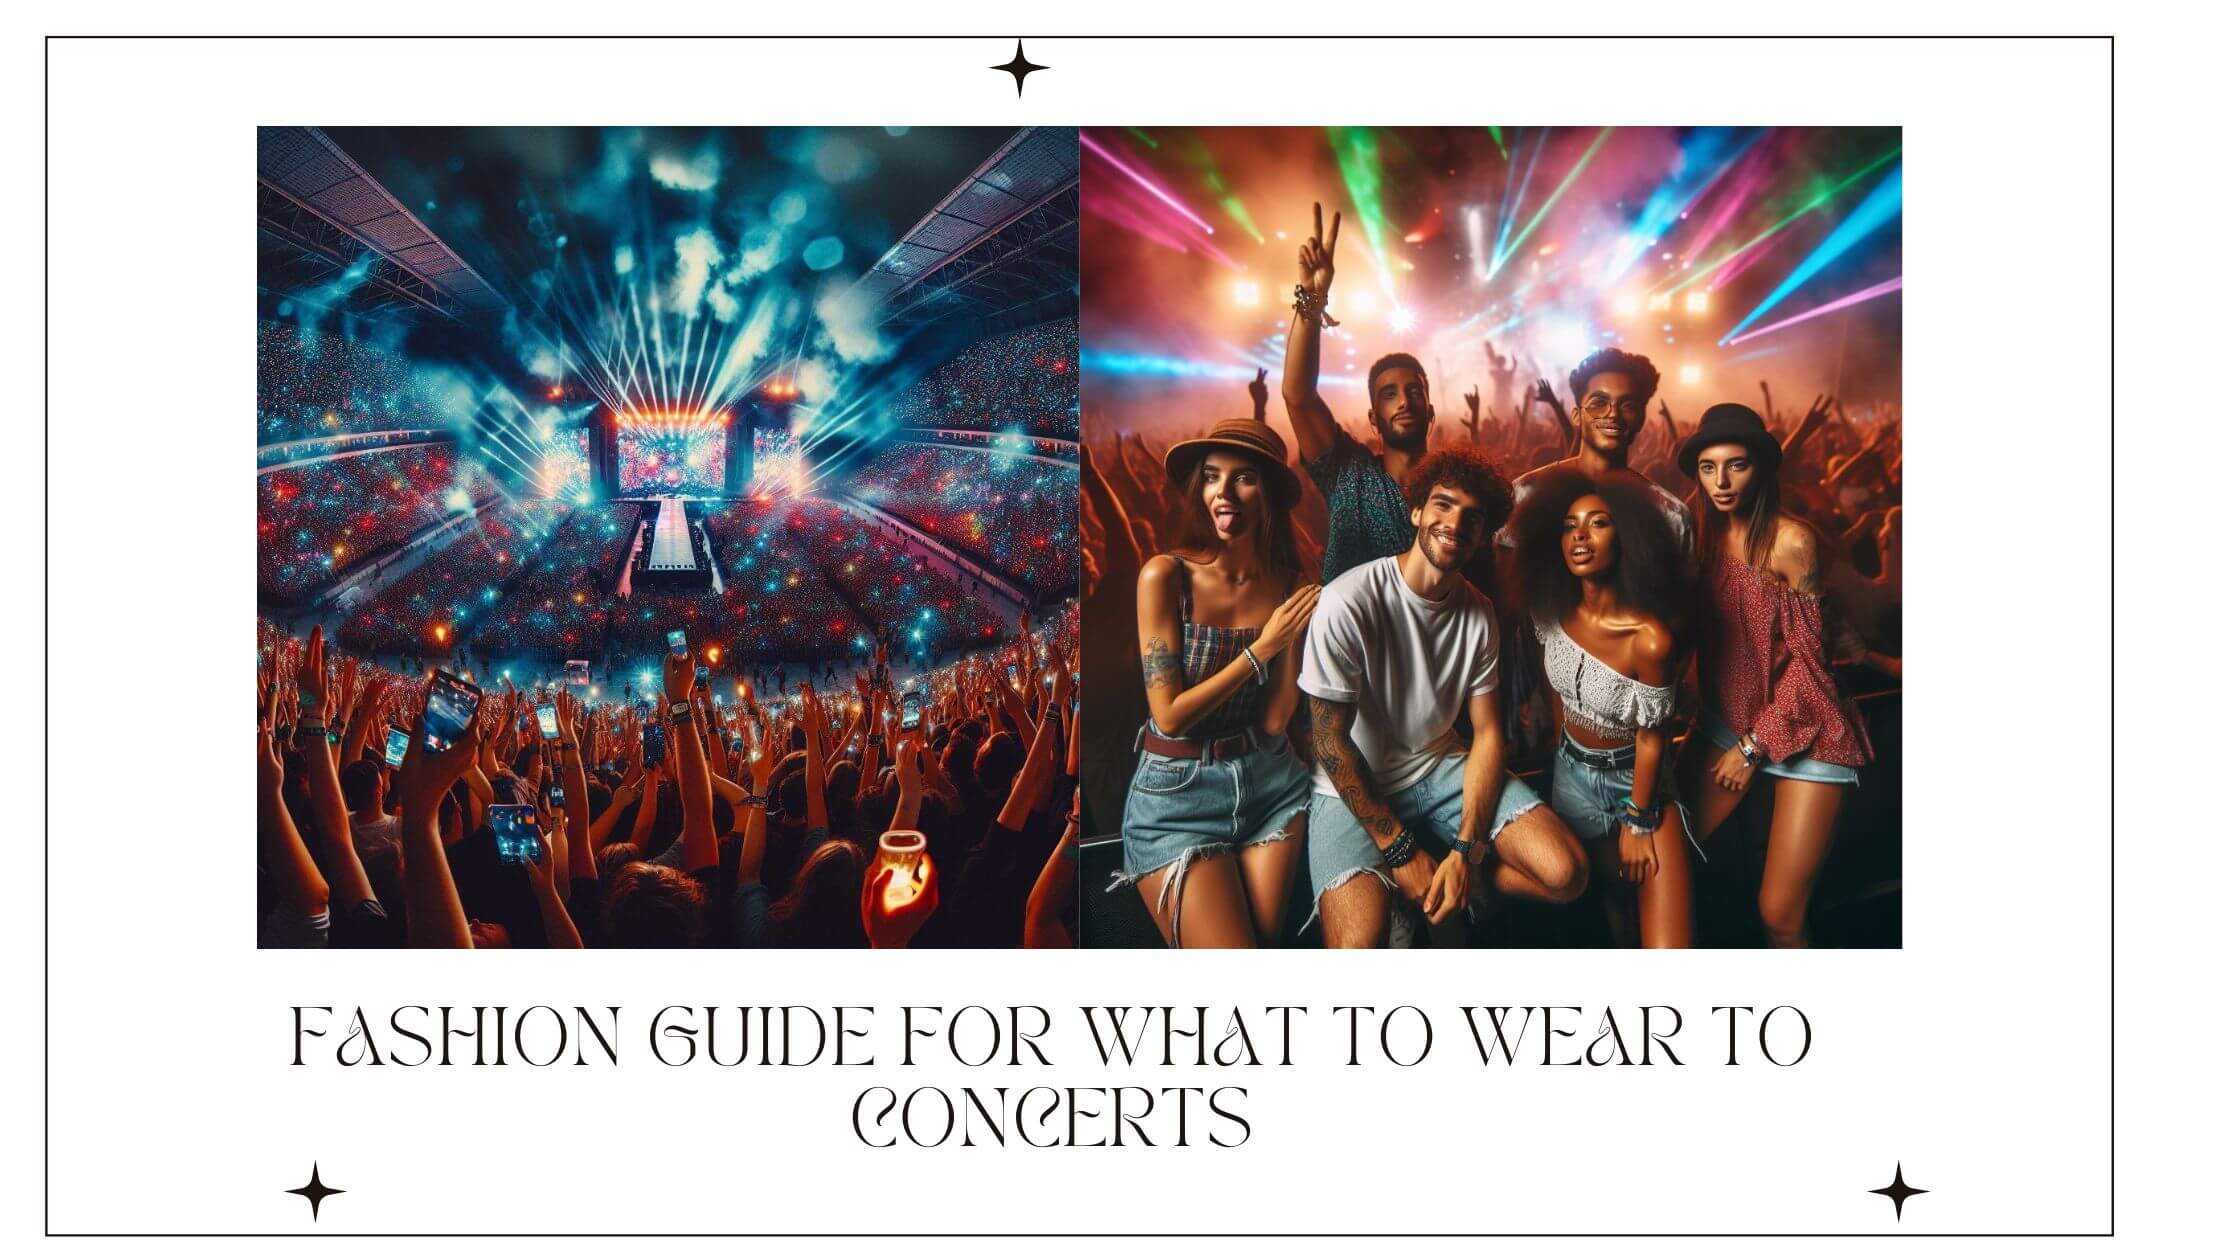 A Fashion Guide for What to Wear to Concerts